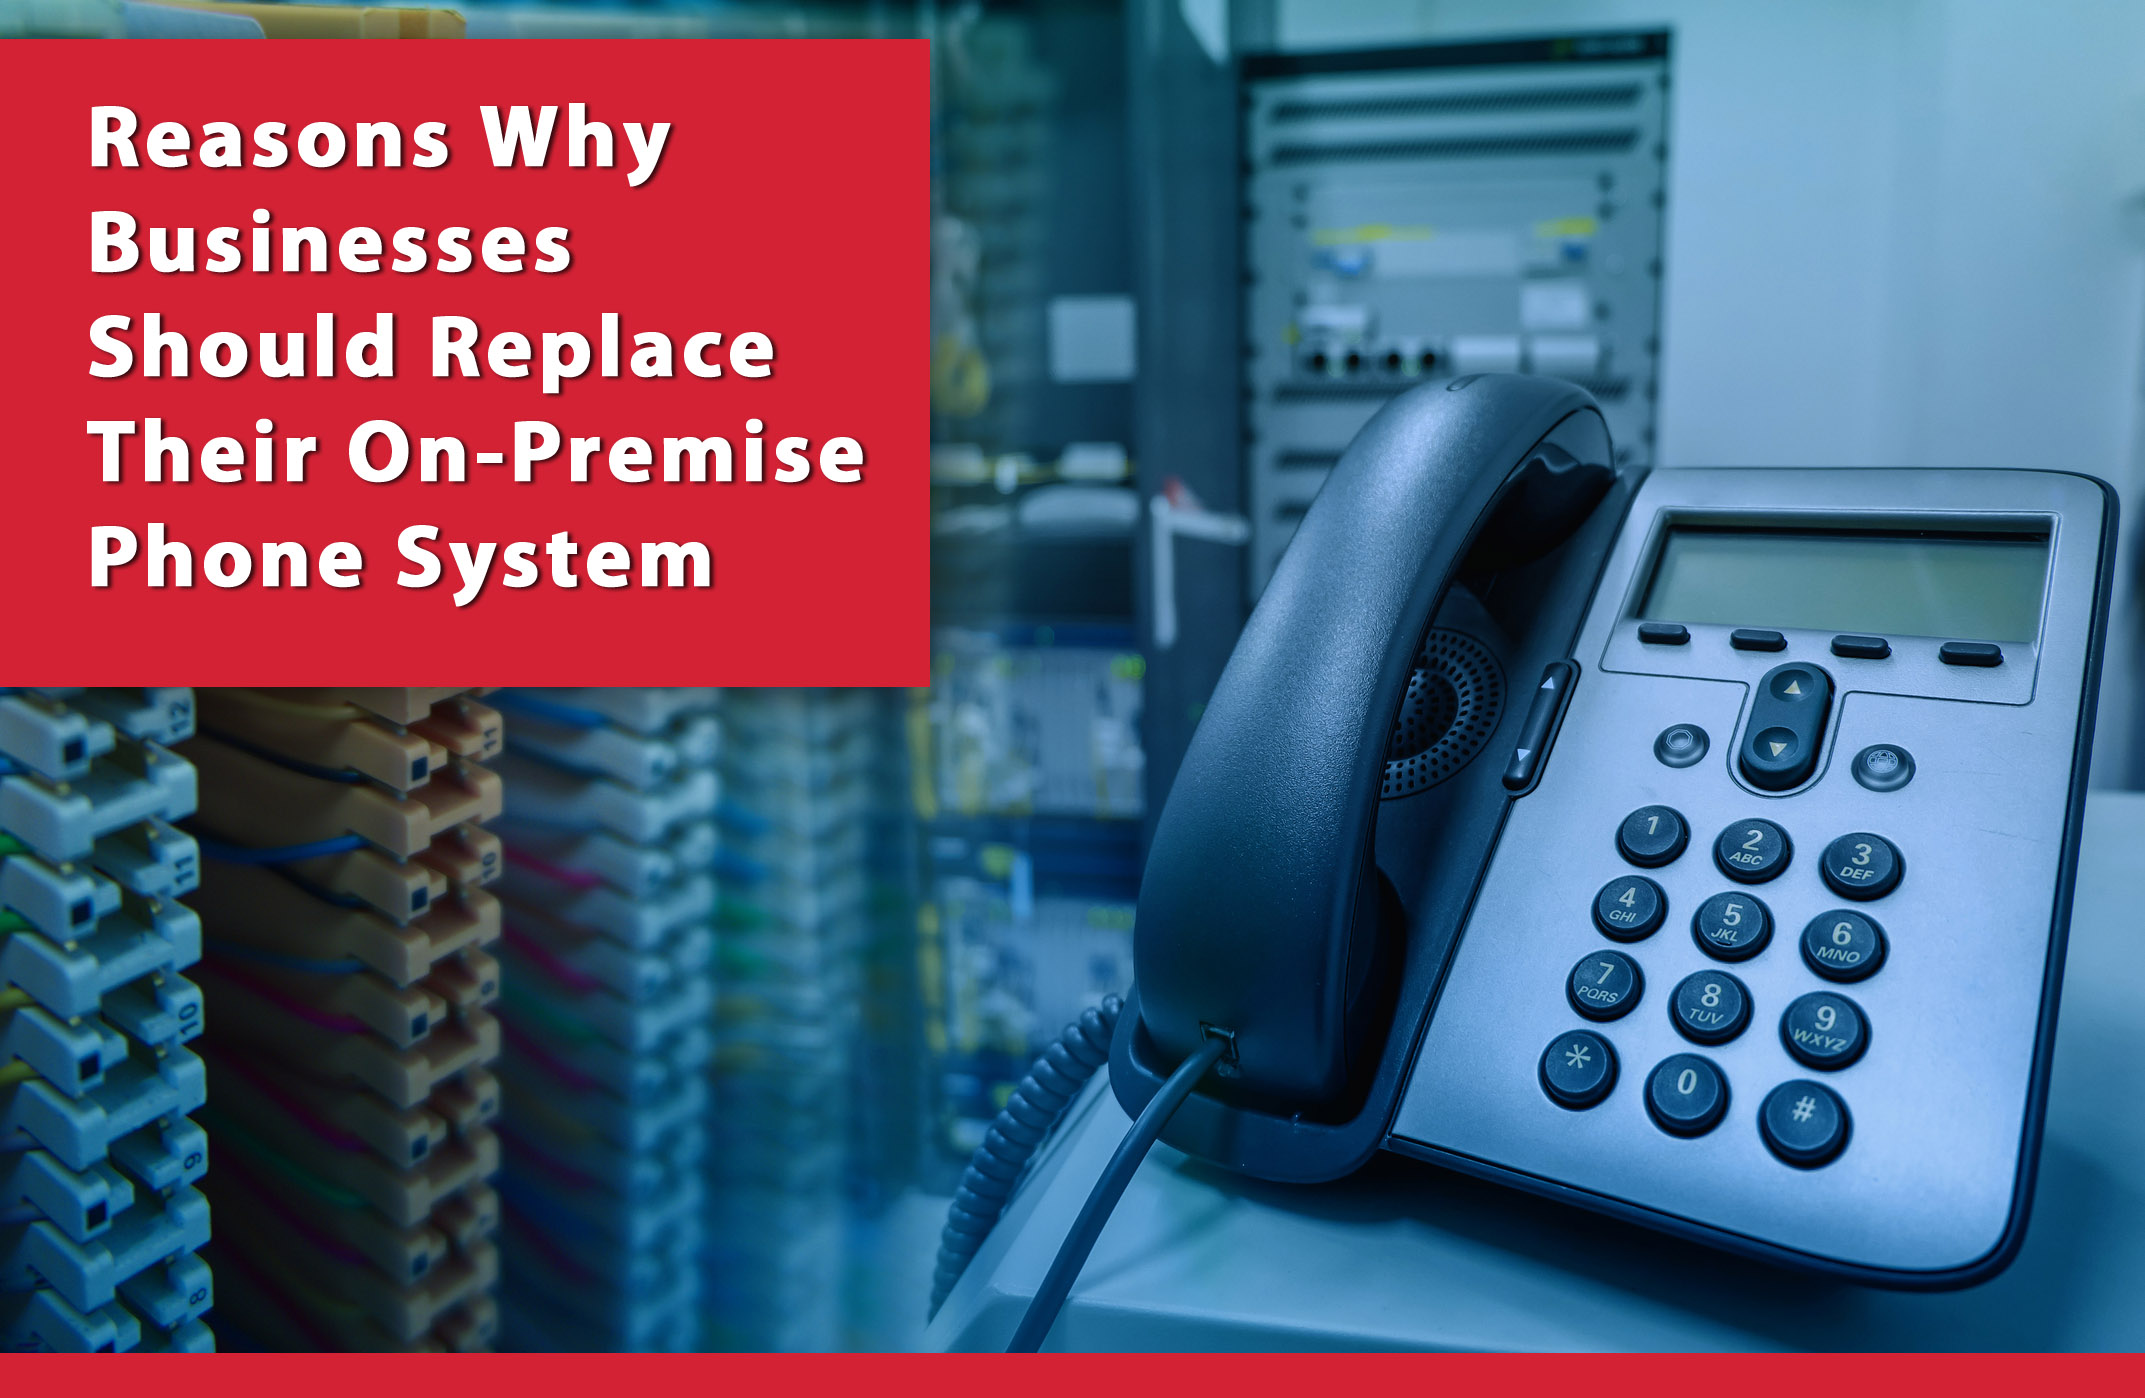 Reasons Why Your Business Should Replace Their On-Premise Phone System and Move to the Cloud